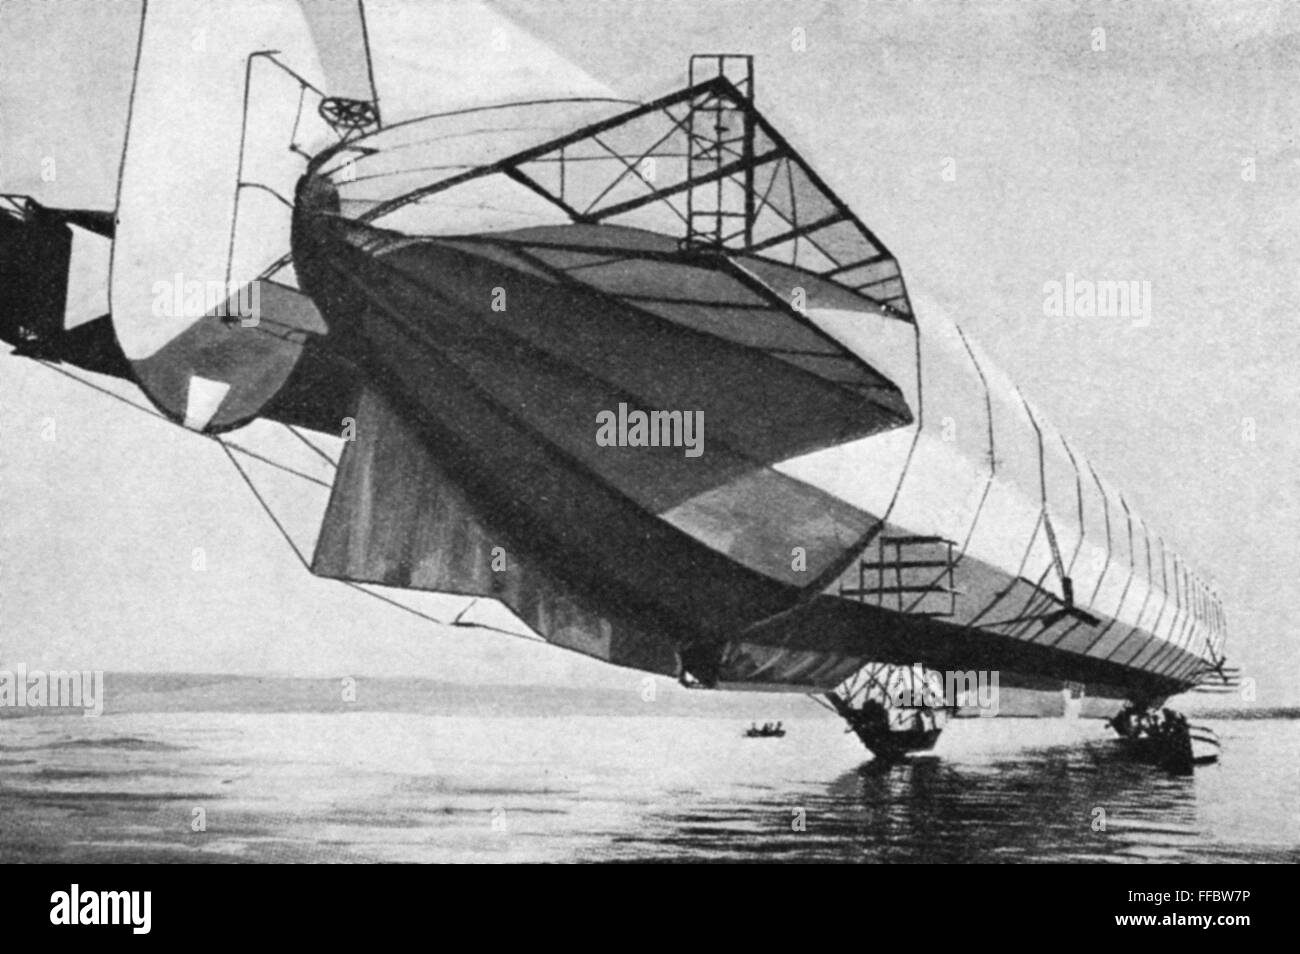 COUNT ZEPPELIN'S AIRSHIP. /nAirship invented by Count Ferdinand von Zeppelin (Graf Zeppelin). Early 20th century photograph. Stock Photo